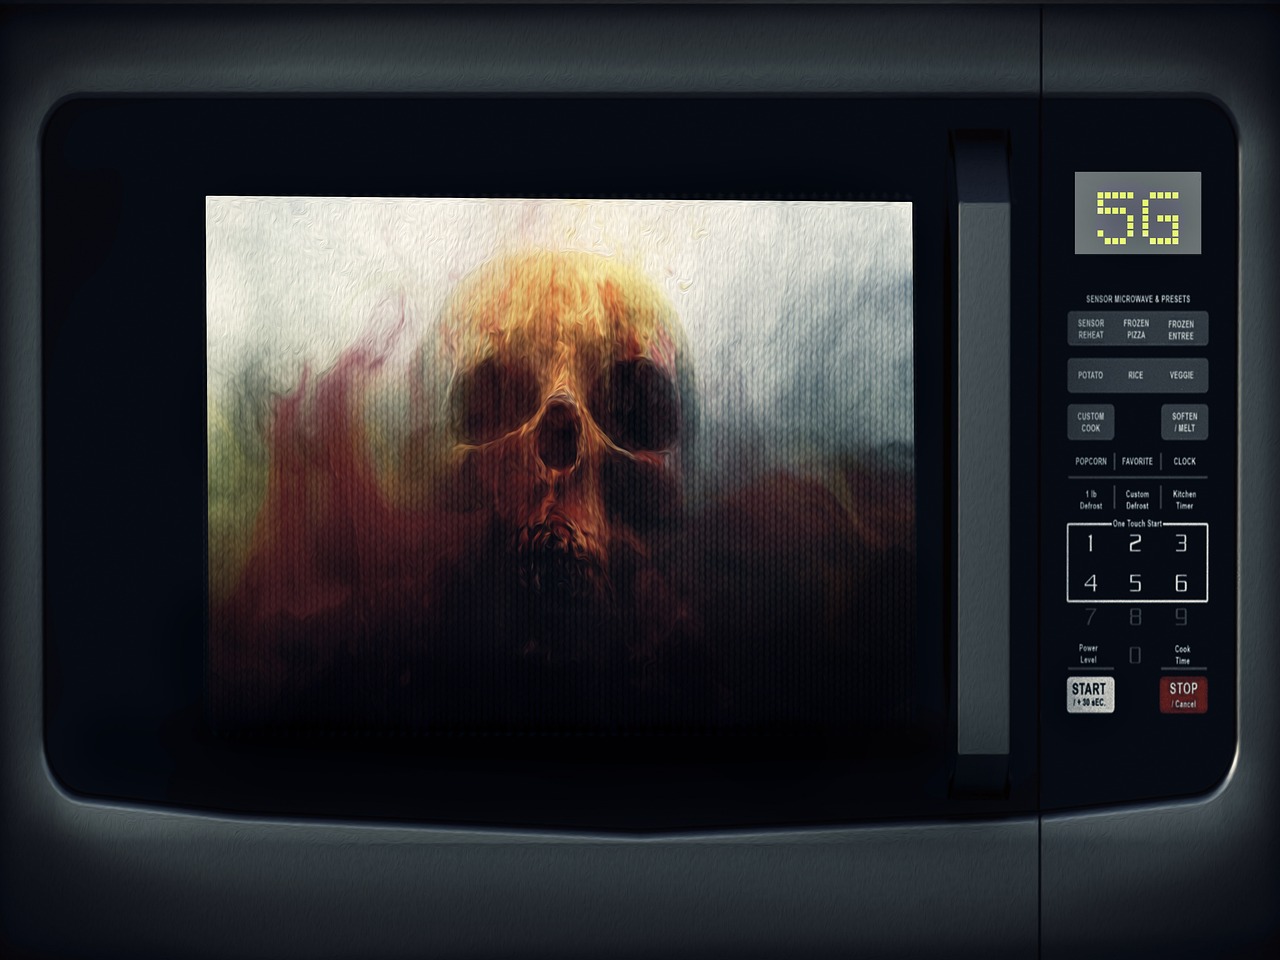 Are There Any Health Risks Associated With Using A Microwave?